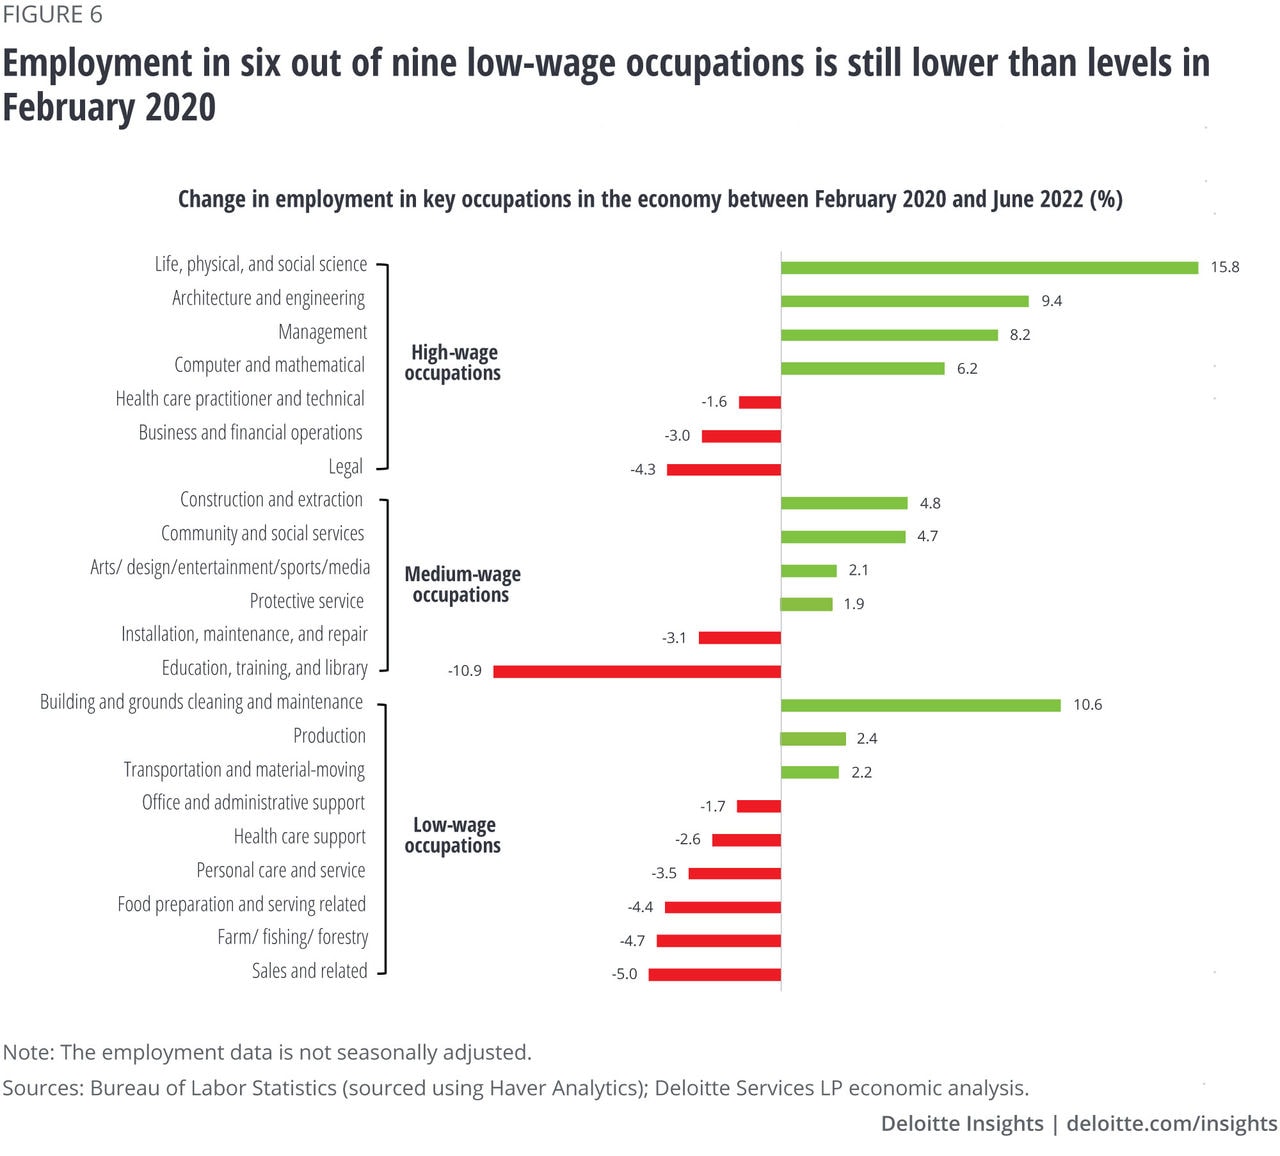 Figure 6. Employment in six out of nine low-wage occupations is still lower than levels in February 2020